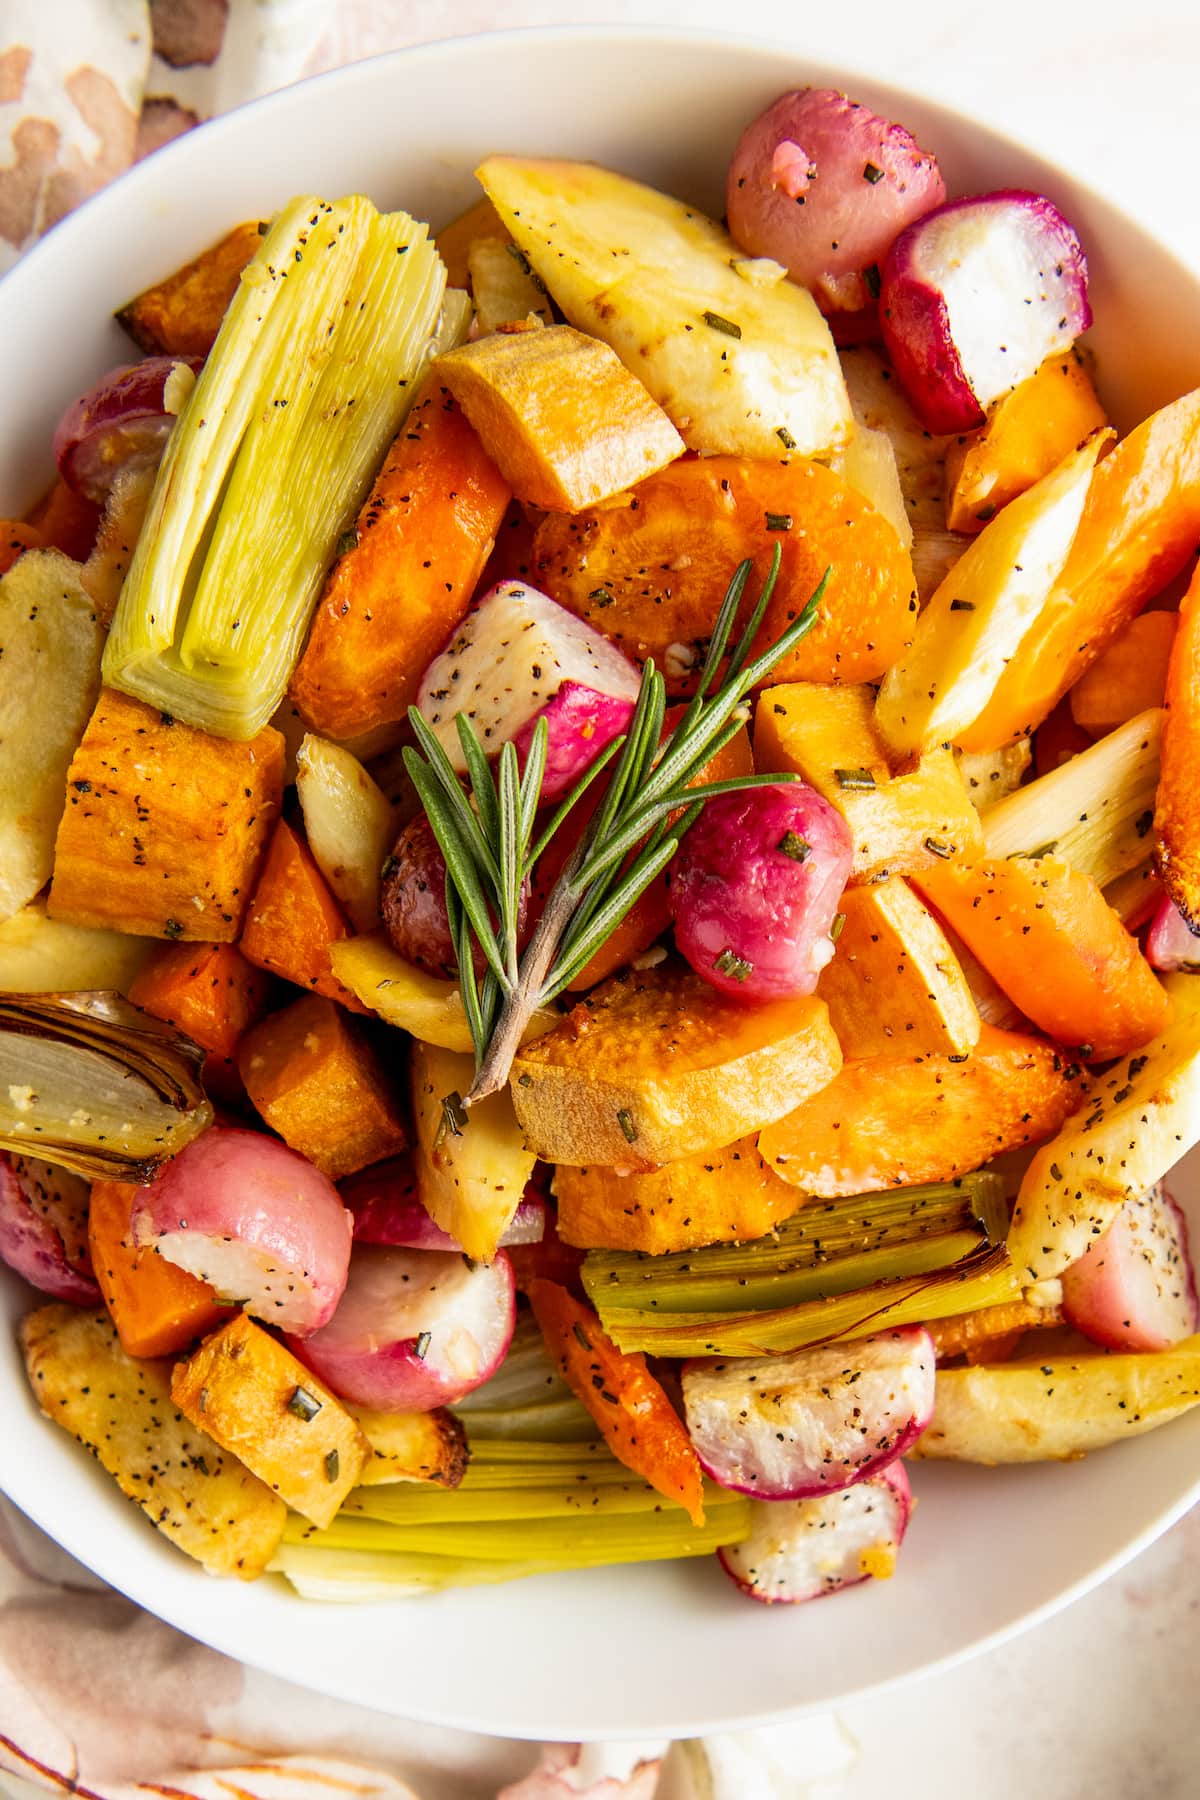 Overhead view of a plate full of roasted root vegetables, topped with a sprig of parsley